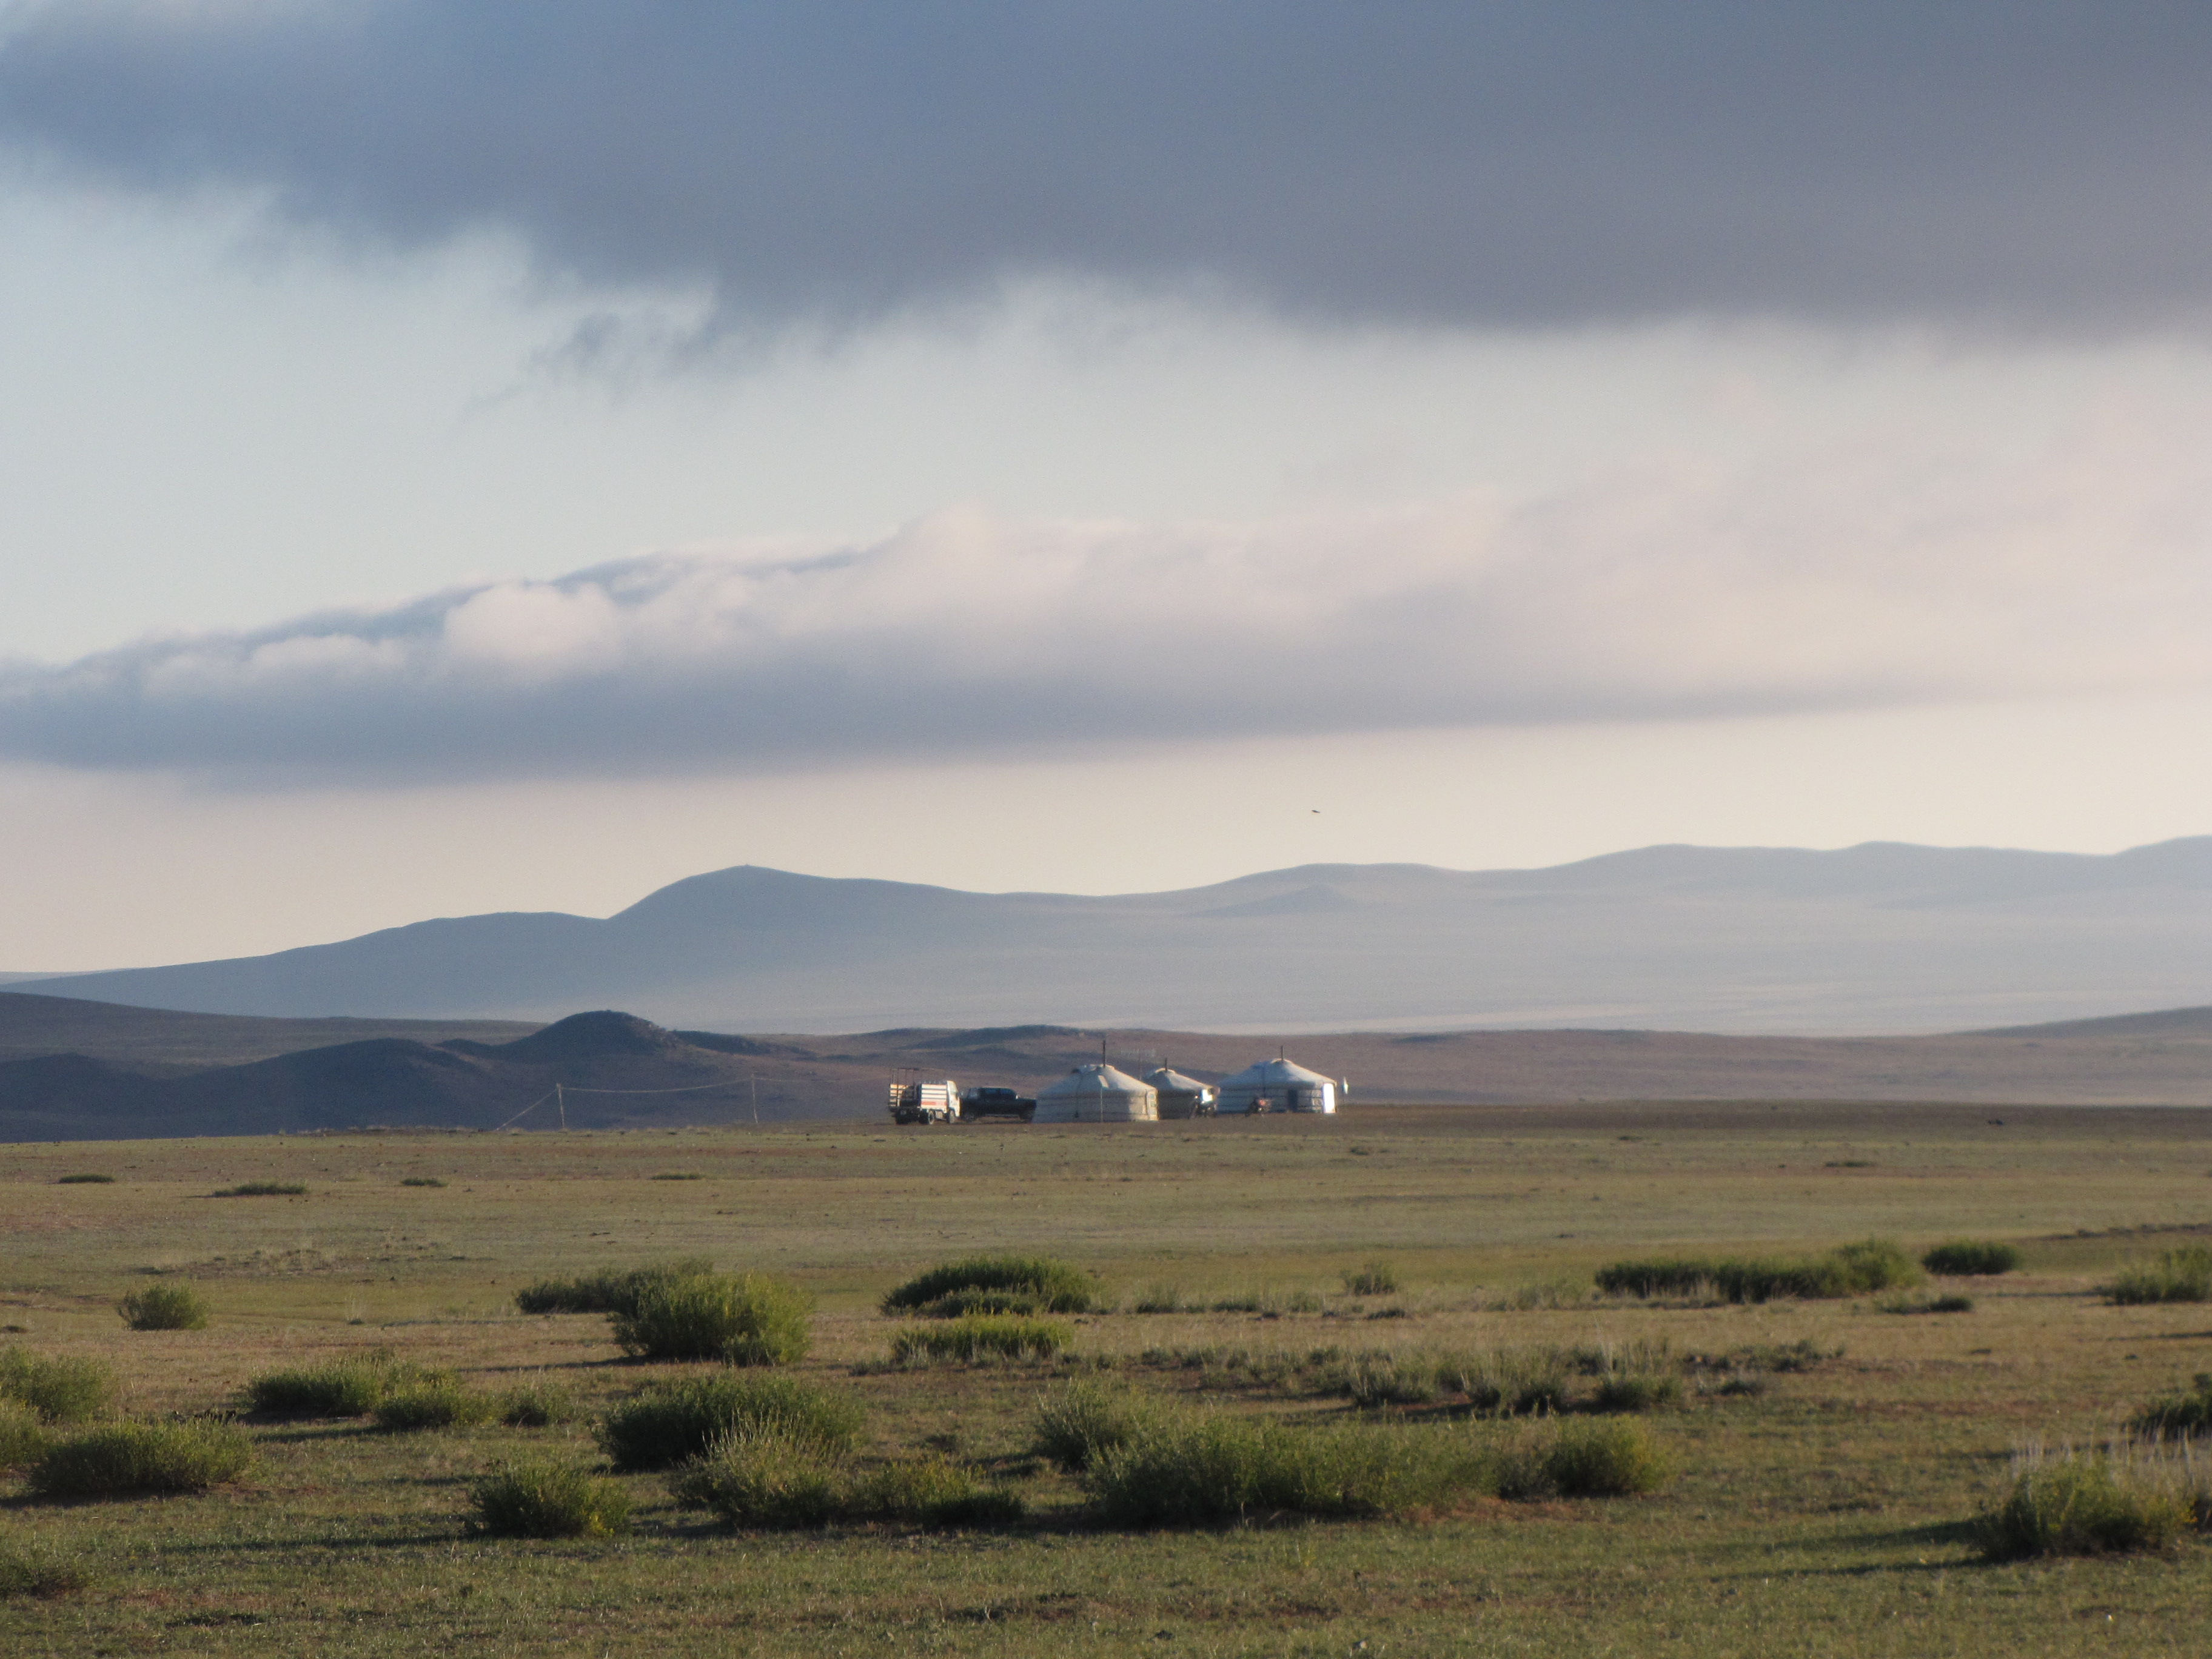 Mongolian gers in the wide open steppe landscape of Mongolia. One of the popular questions about Mongolia is about what is a typical landscape.